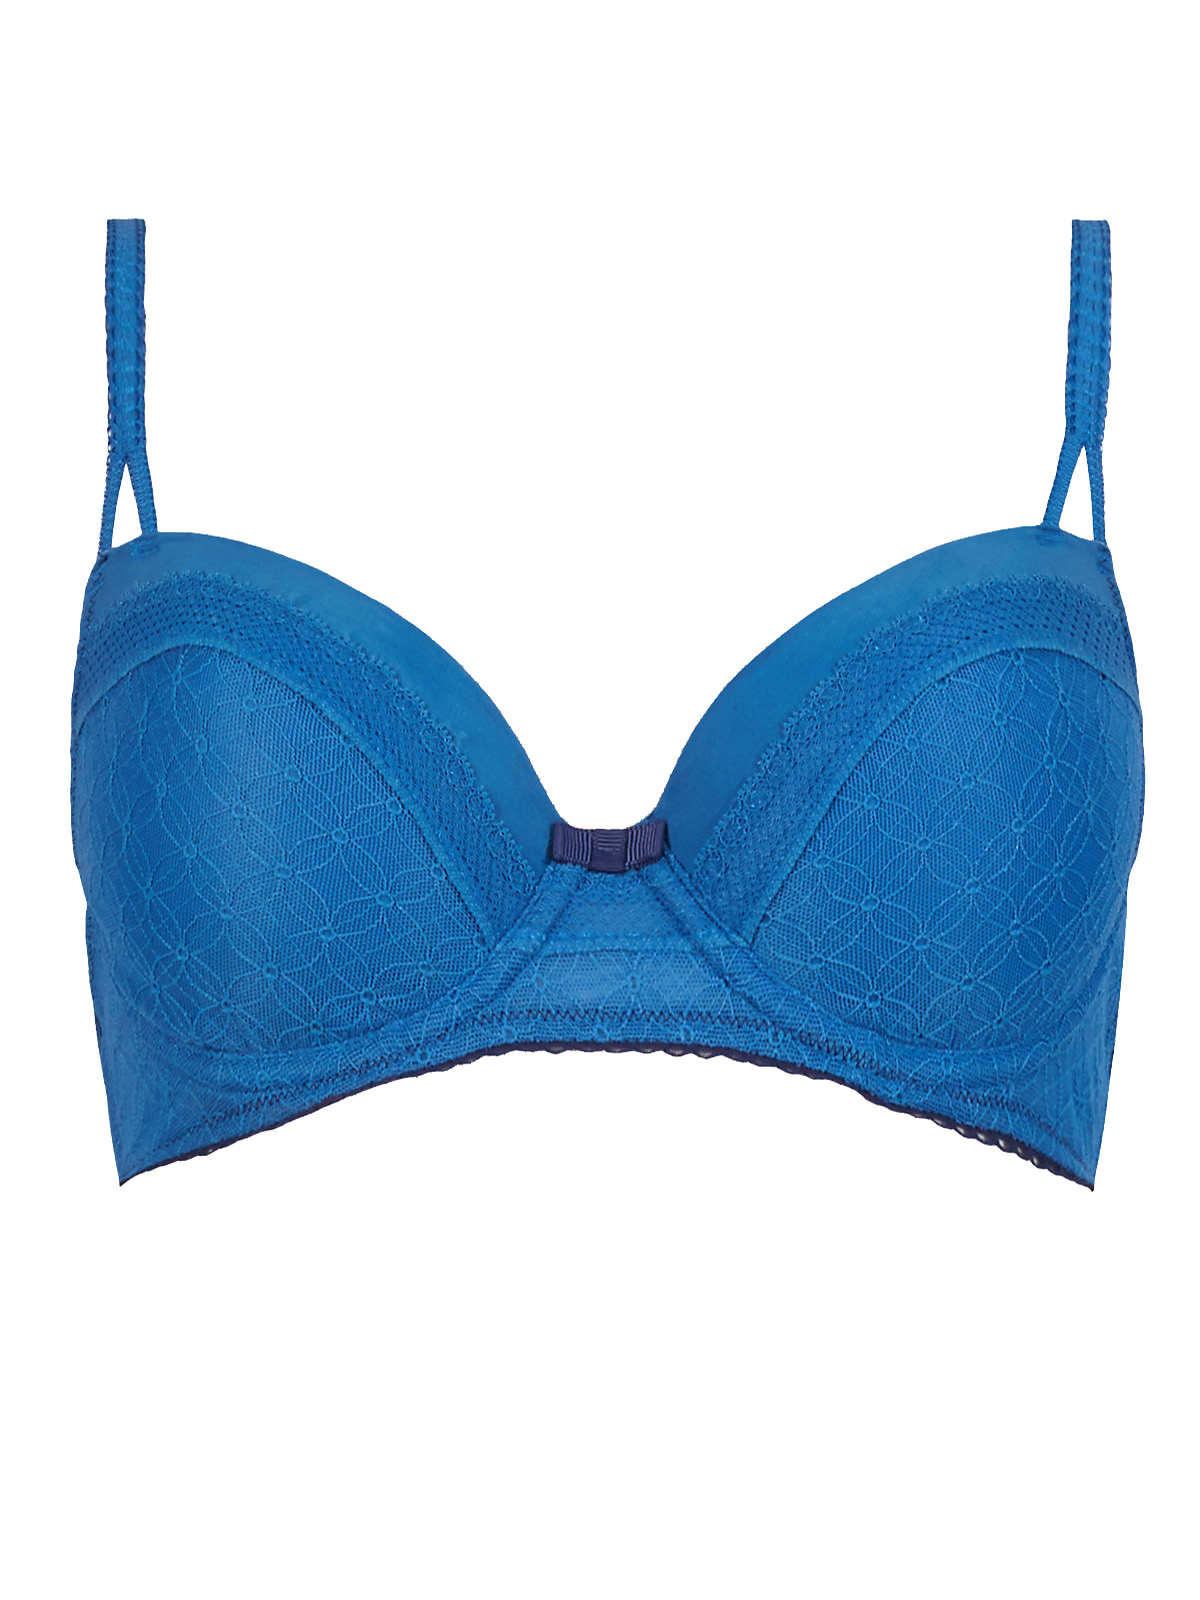 Marks and Spencer - - M&5 BLUE Lace Padded Balcony Bra - Size 30 to 38 ...